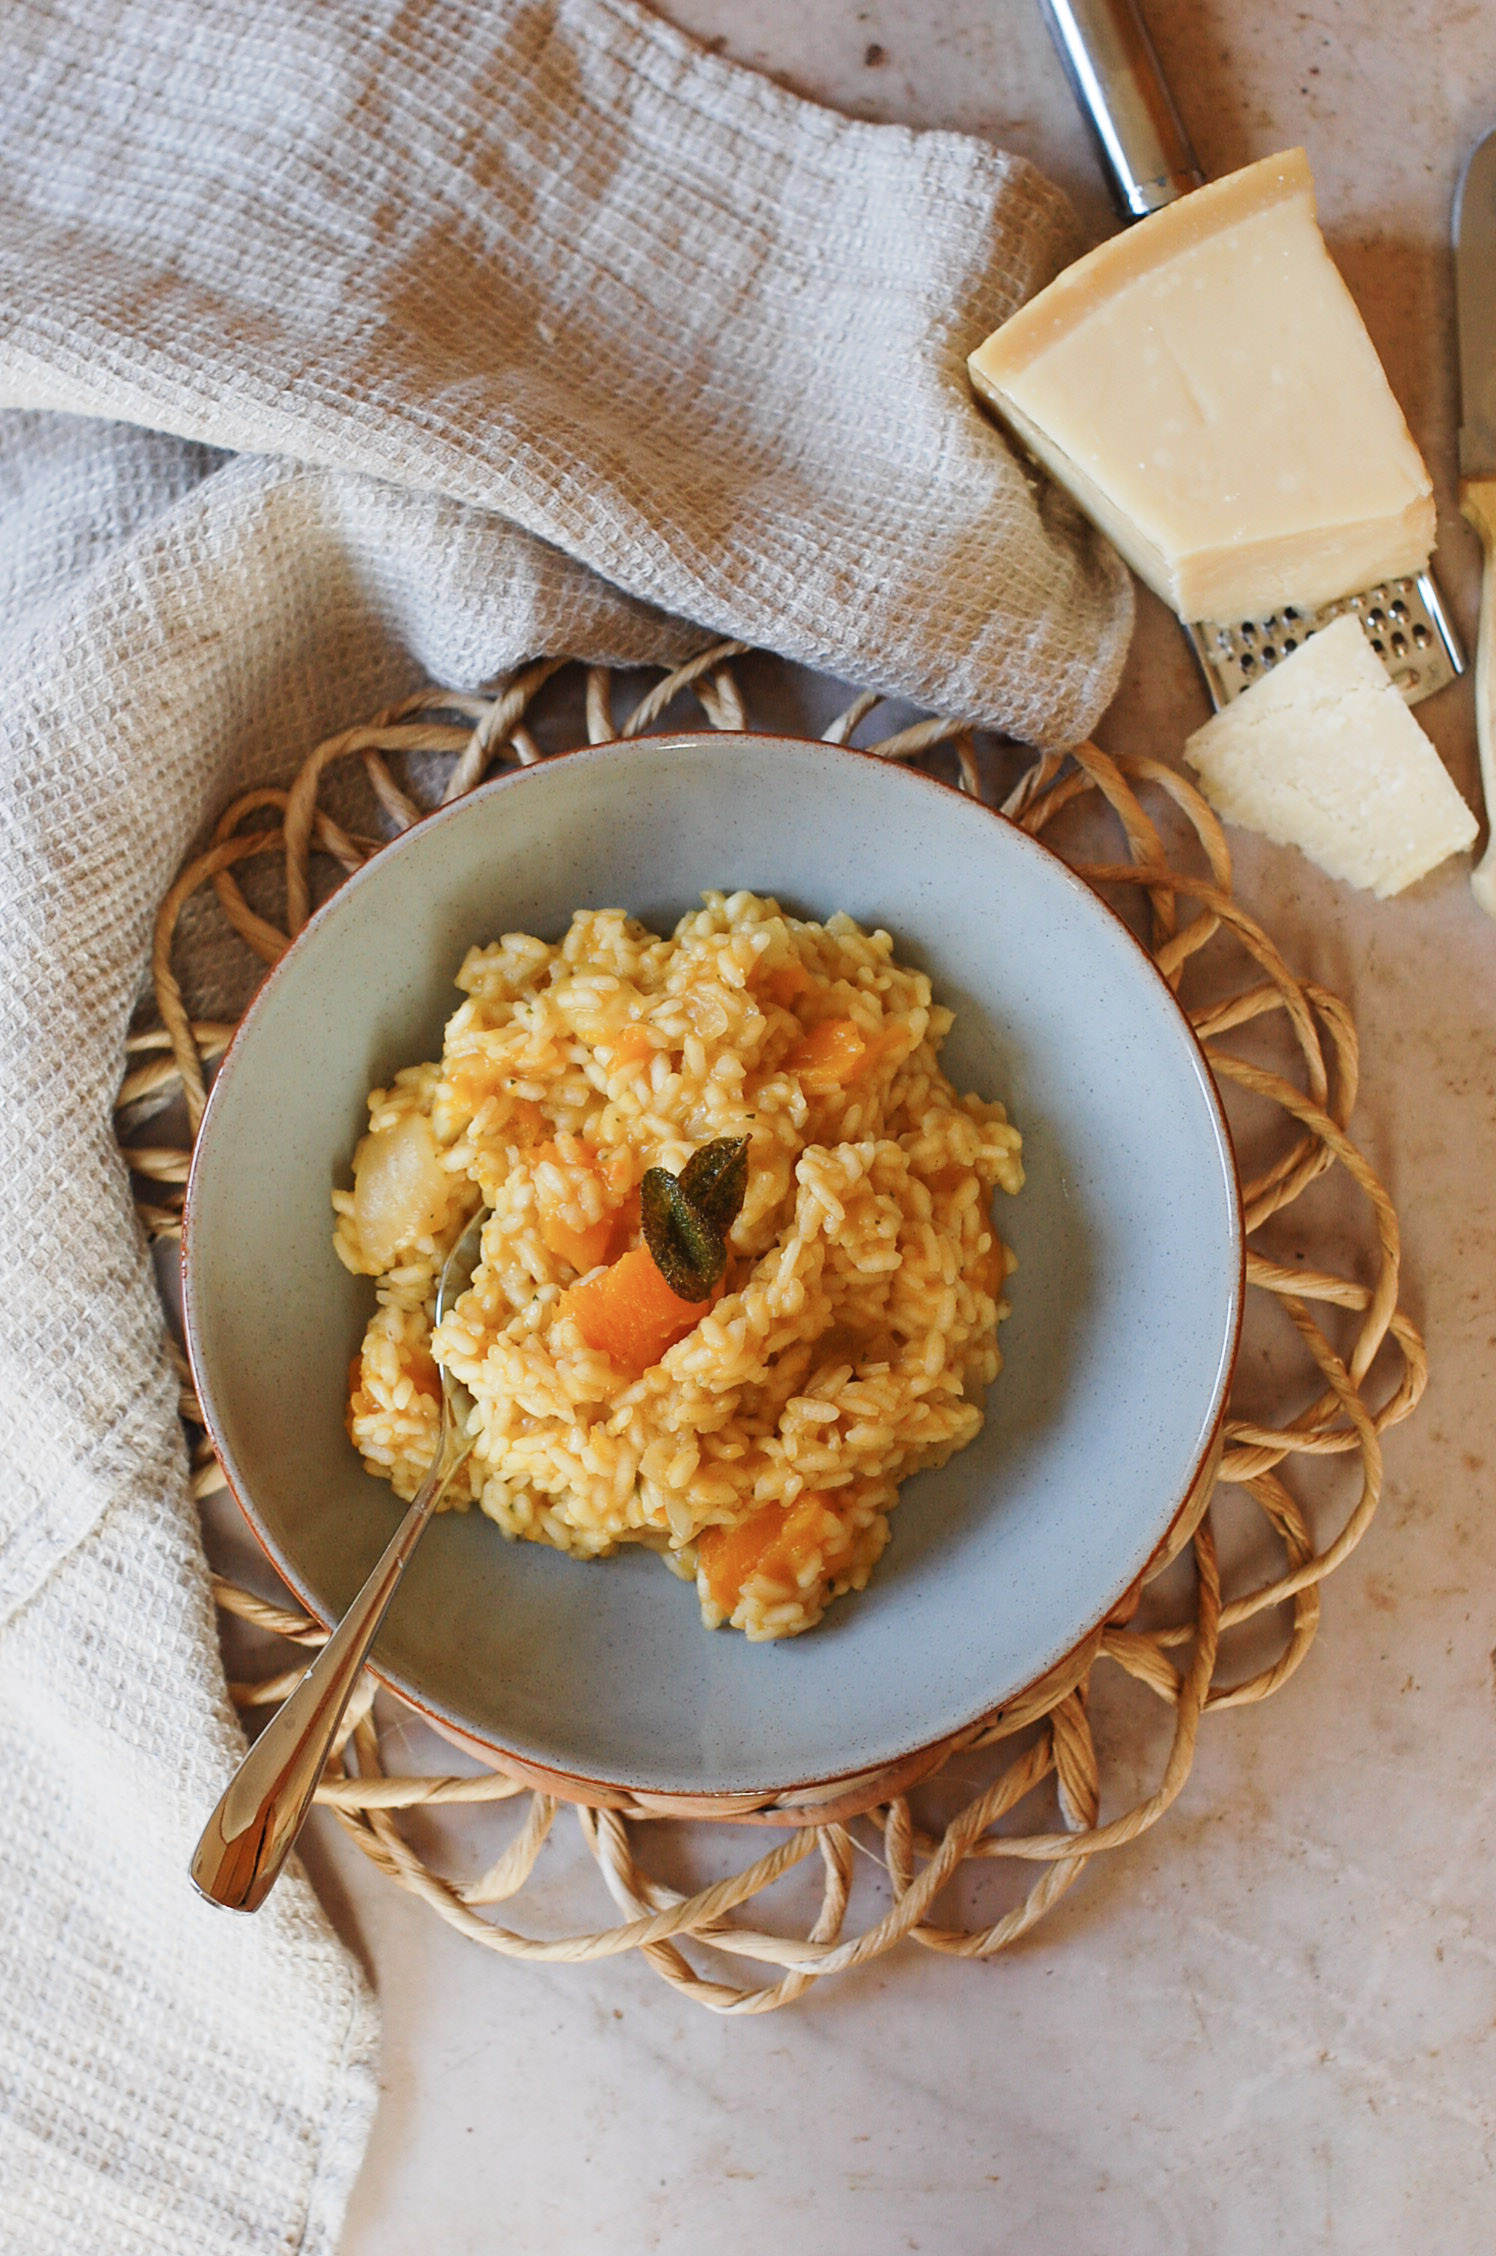 Roasted Butternut Squash and Sage Risotto